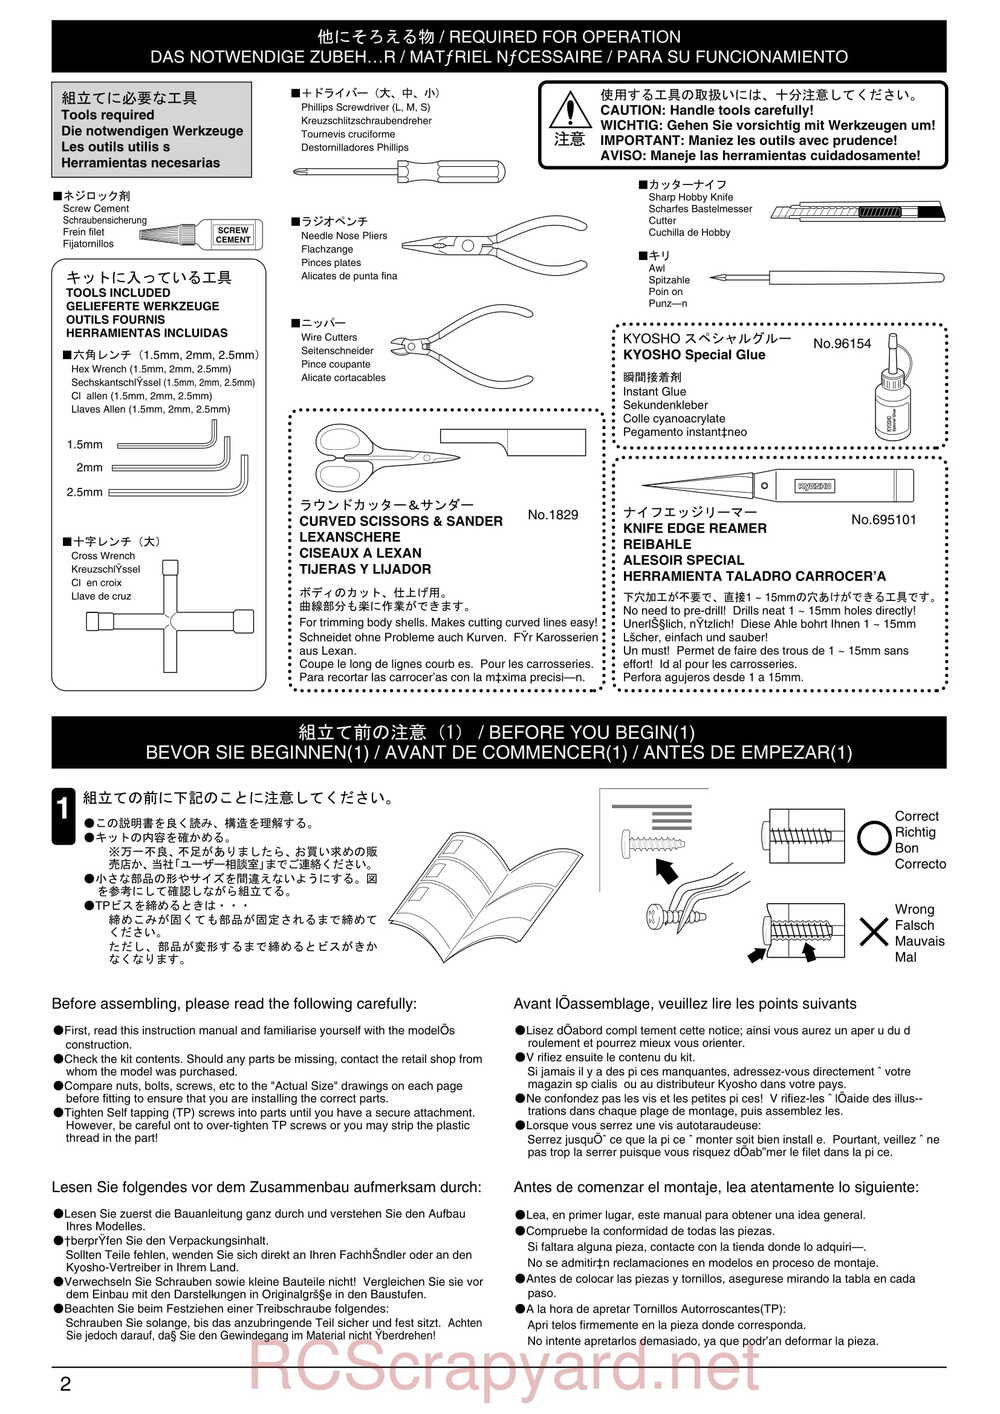 Kyosho - 31095 - TR-15 Stadium-Force - Manual - Page 02